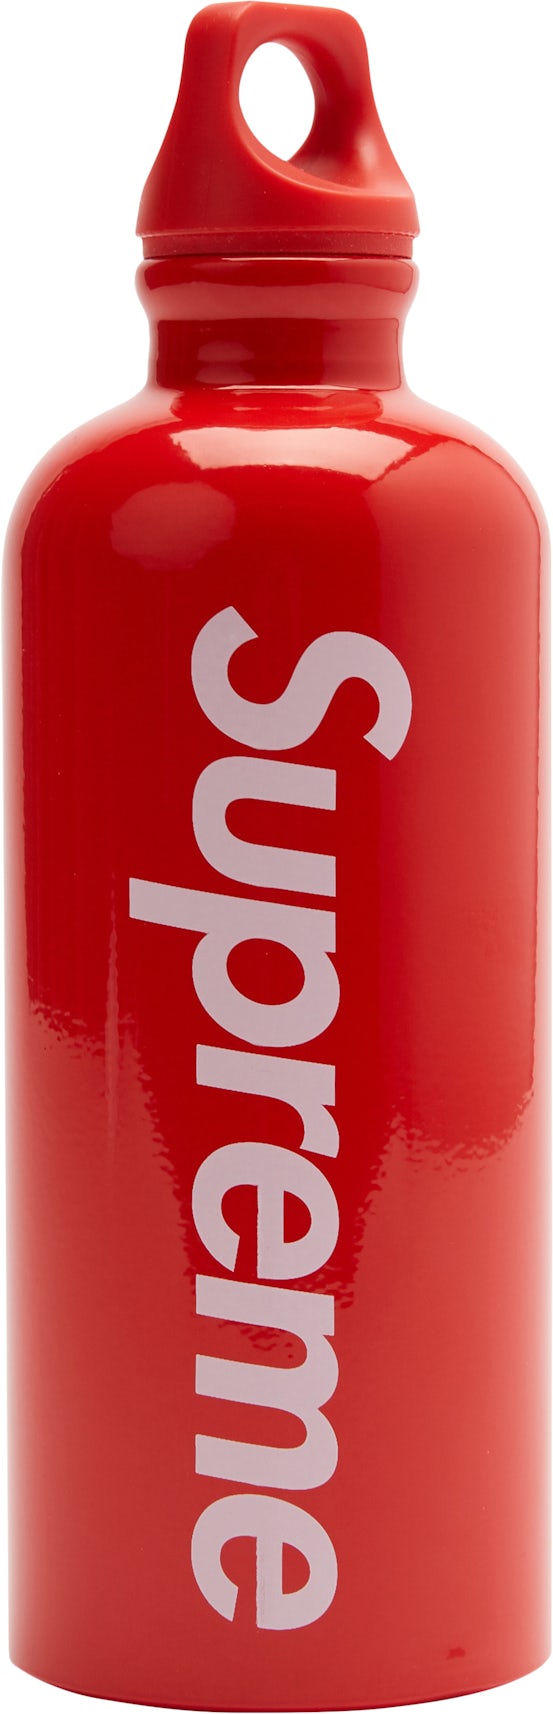 Sigg 1.0 L Red Thermos - Hike & Camp